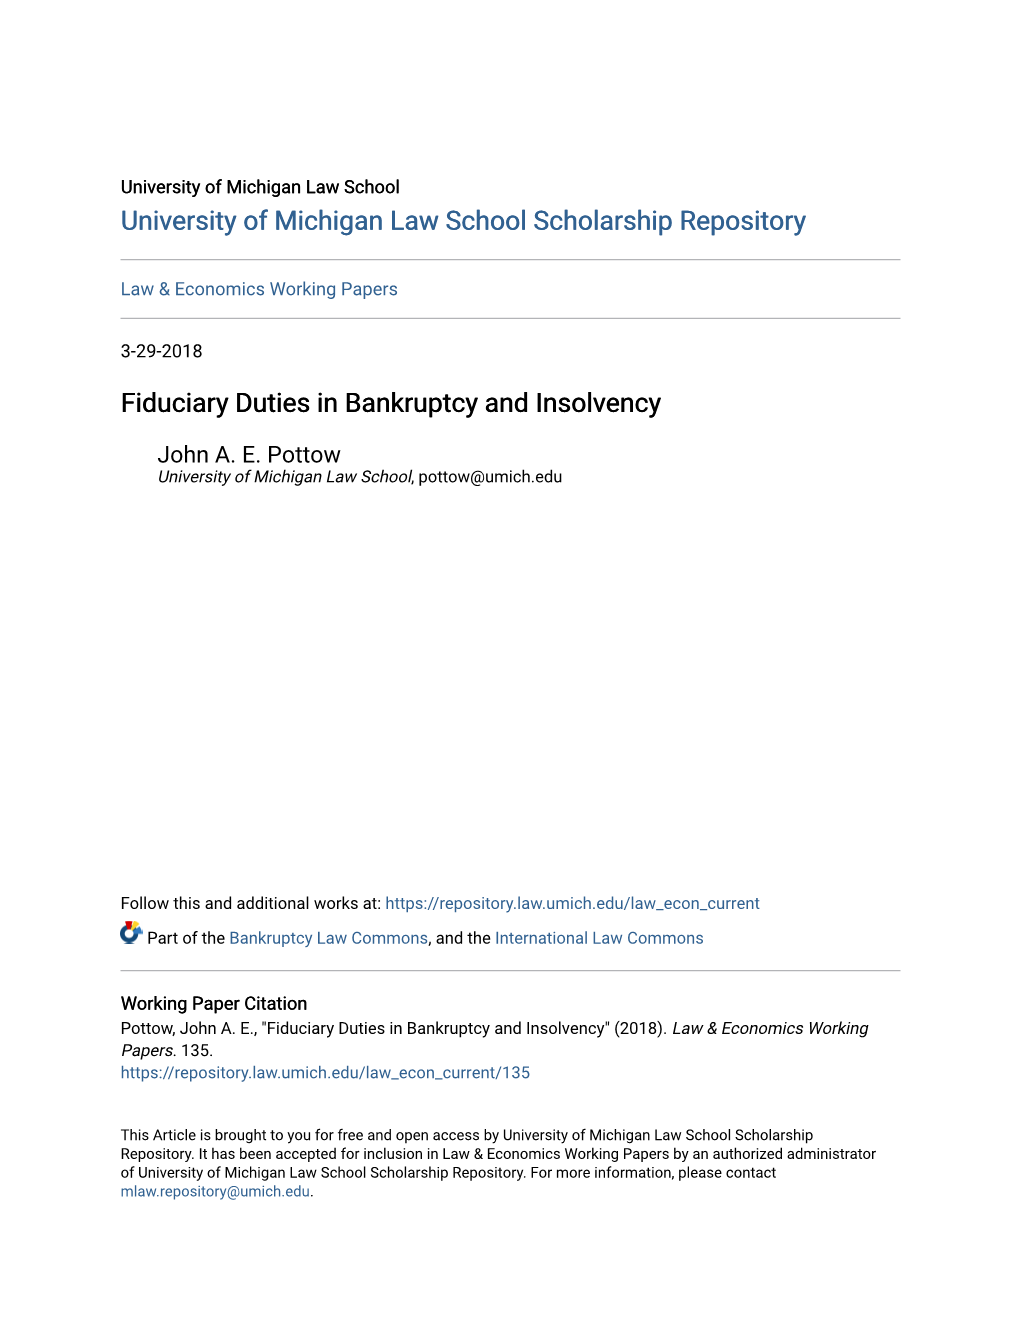 Fiduciary Duties in Bankruptcy and Insolvency